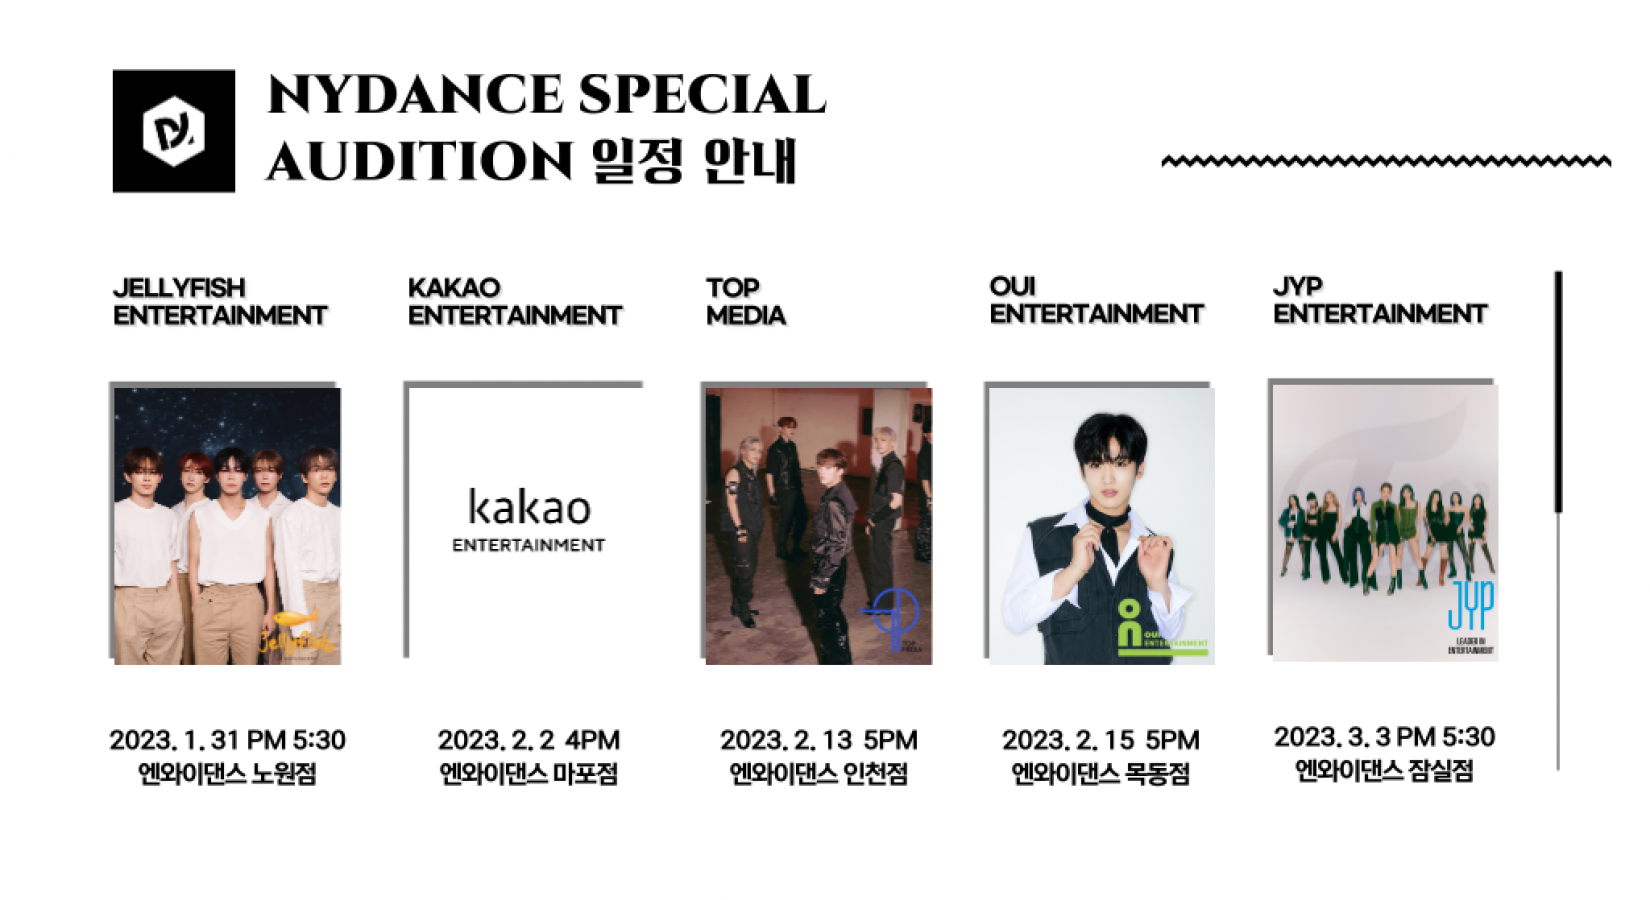 [NYDANCE] 2023년 NYD SPECIAL 오디션